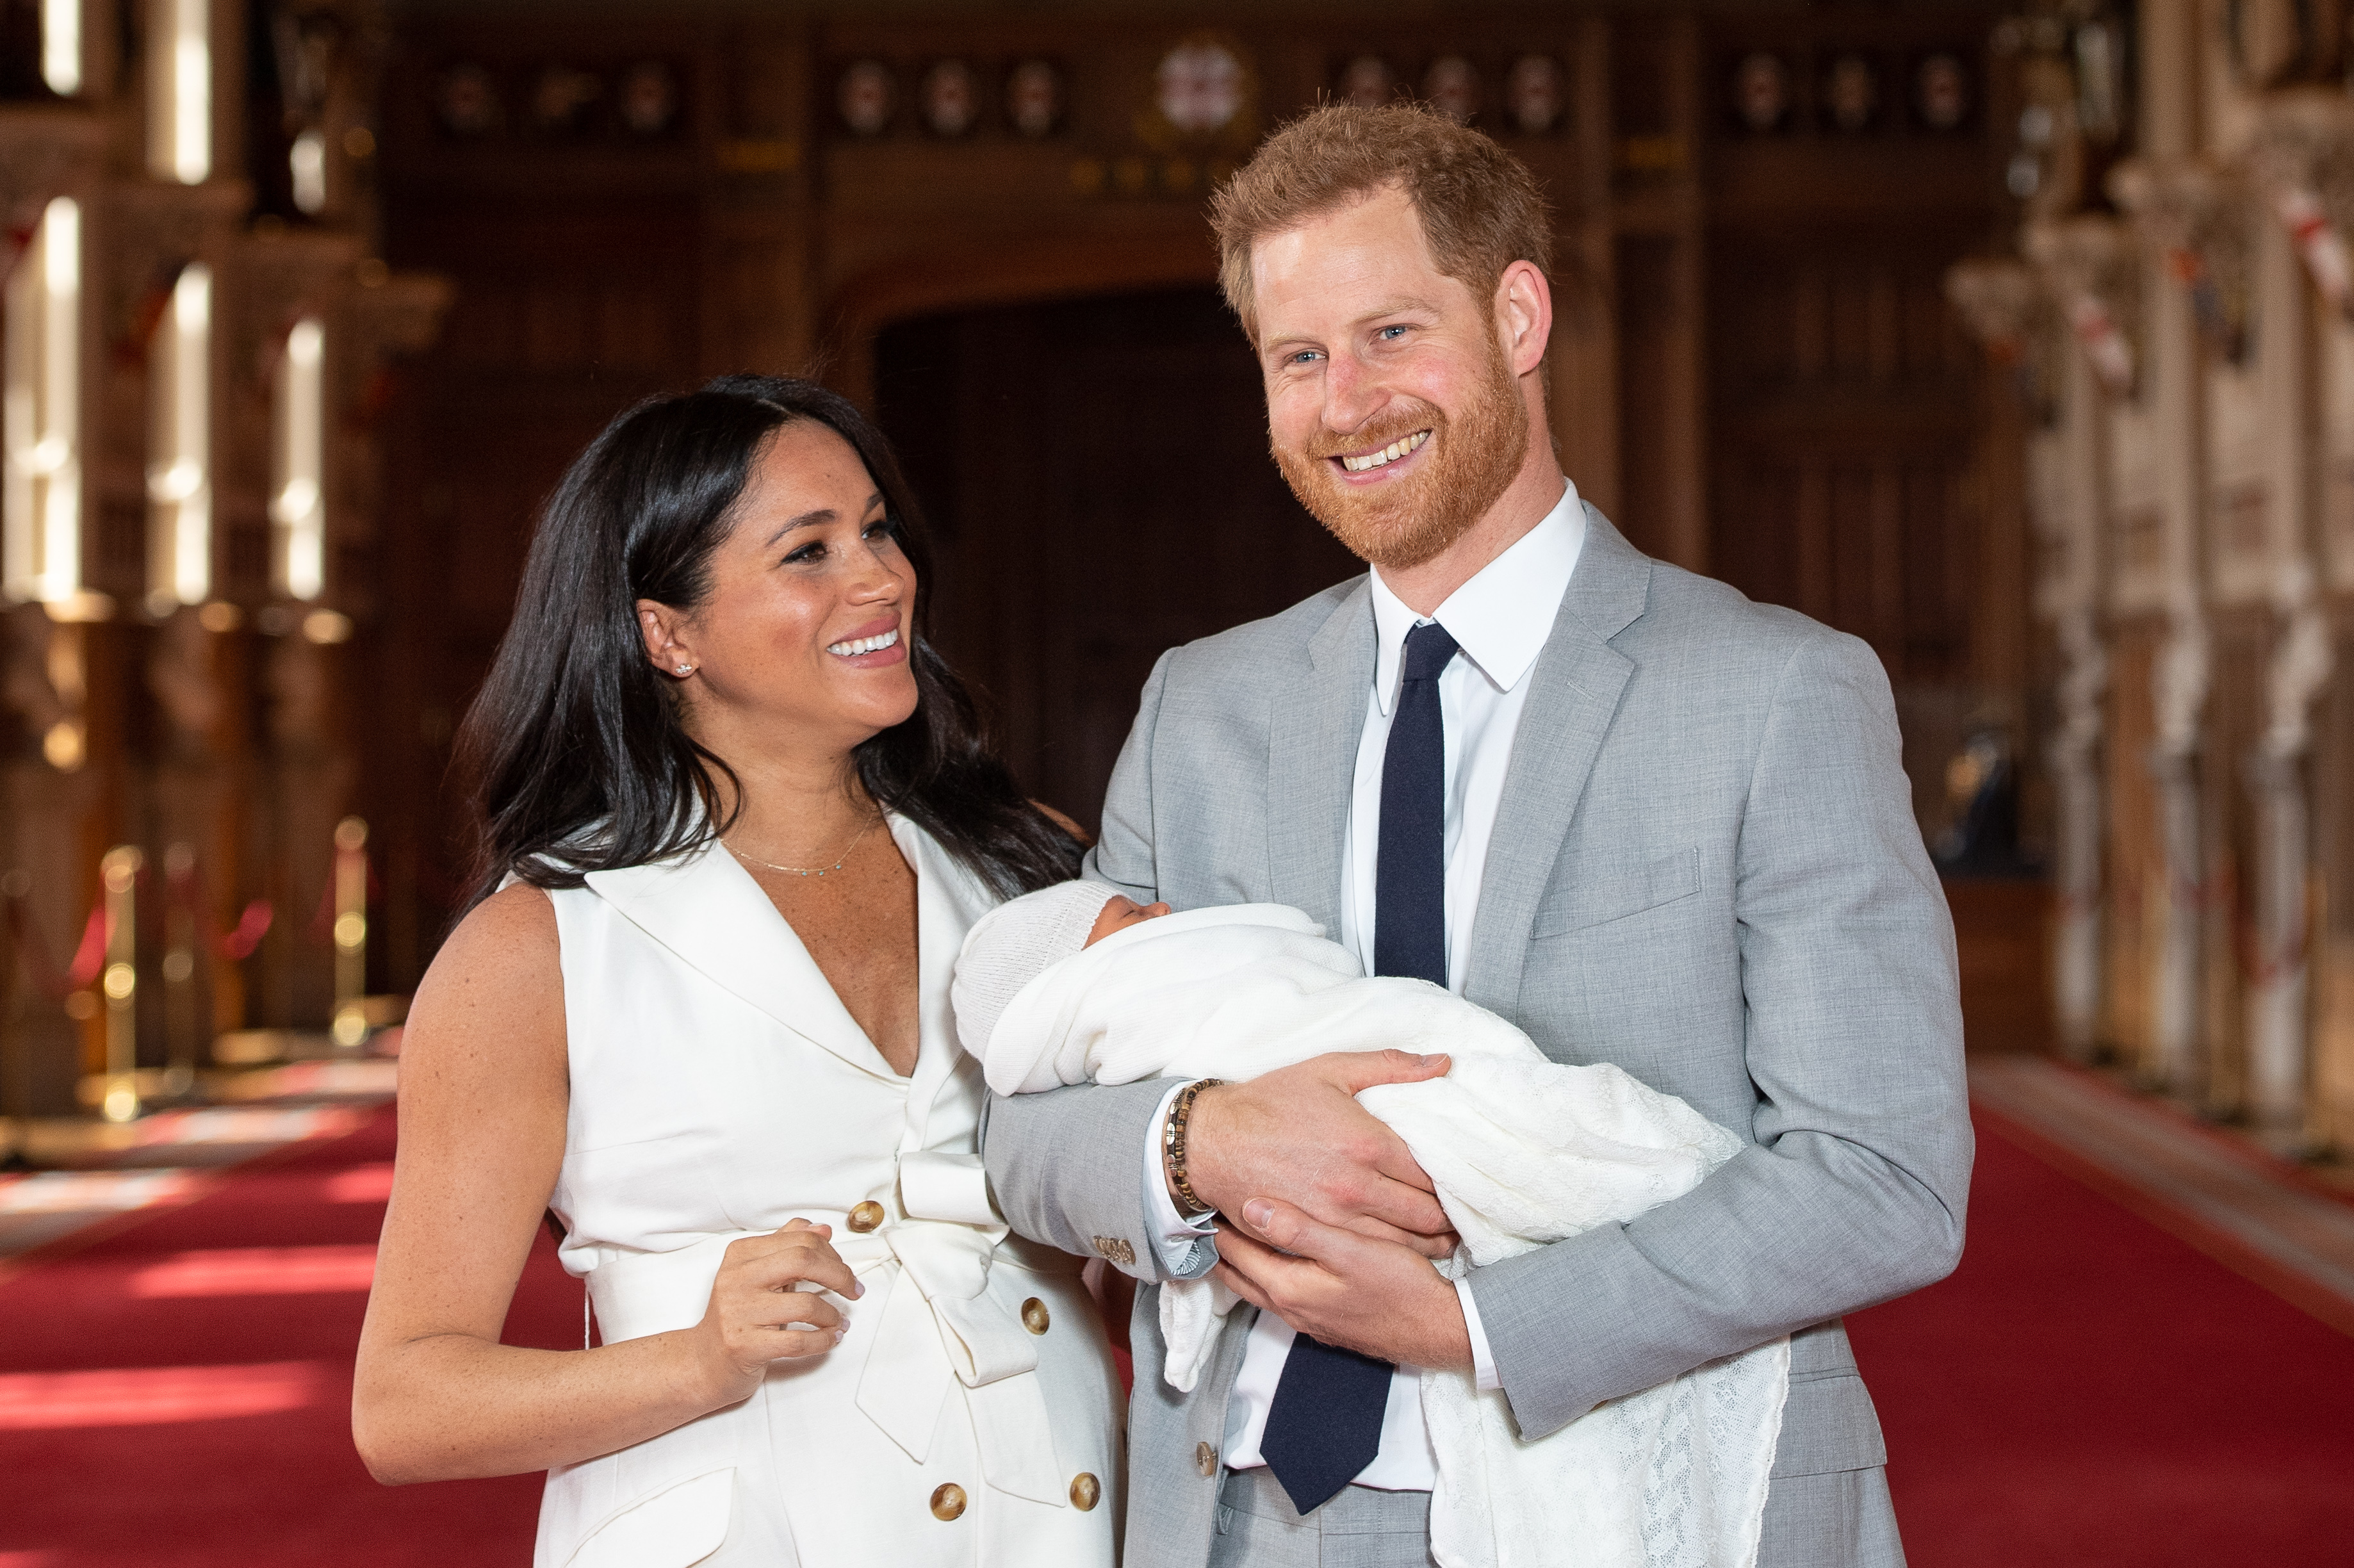 Meghan Markle, Prince Harry, and Prince Archie during a photocall in St George's Hall at Windsor Castle in 2019 | Source: Getty Images